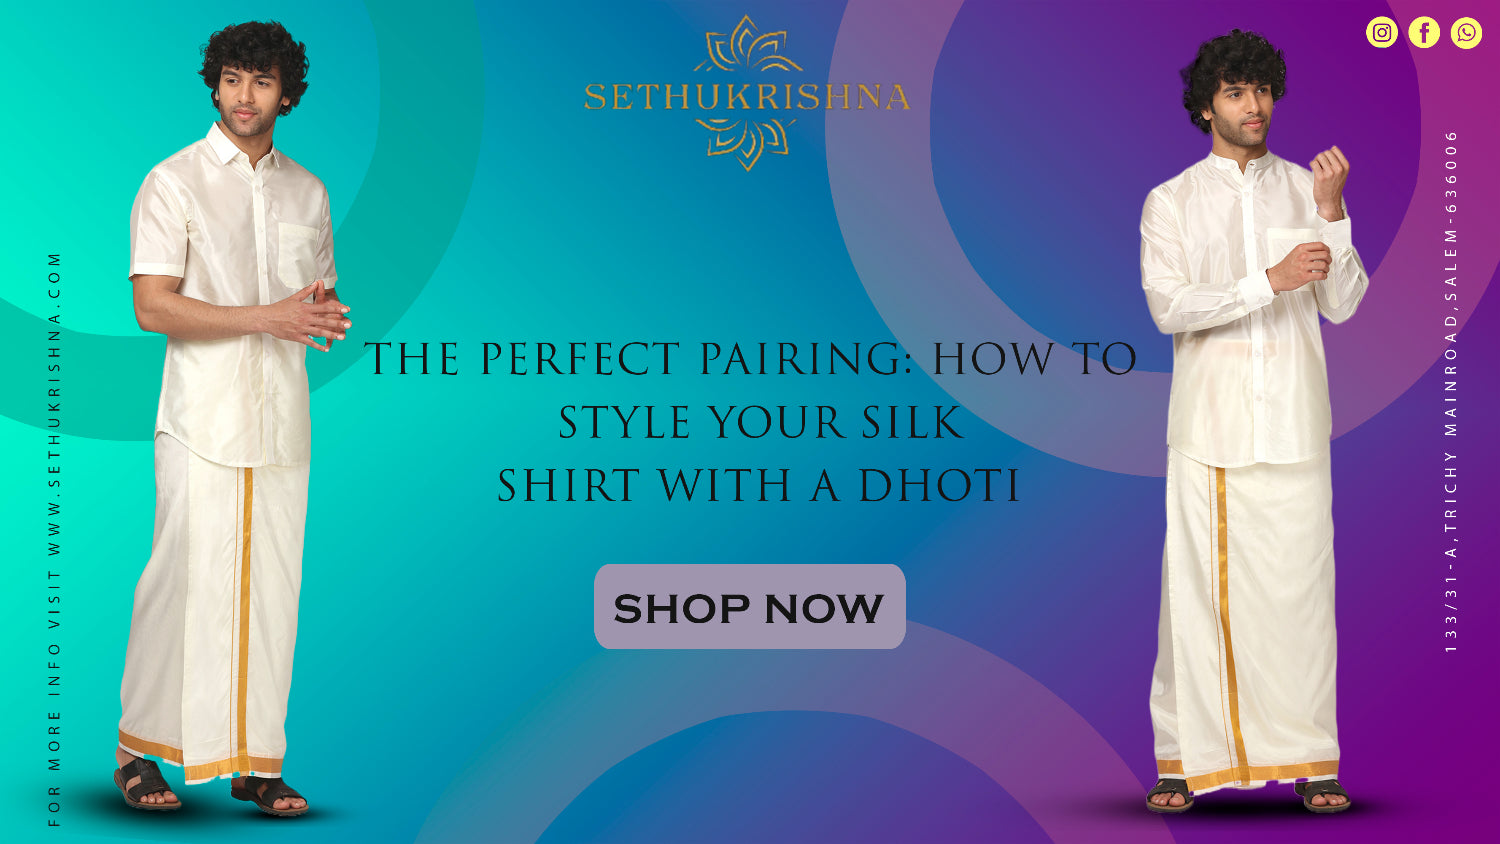 The Perfect Pairing: How to Style Your Silk Shirt with a Dhoti